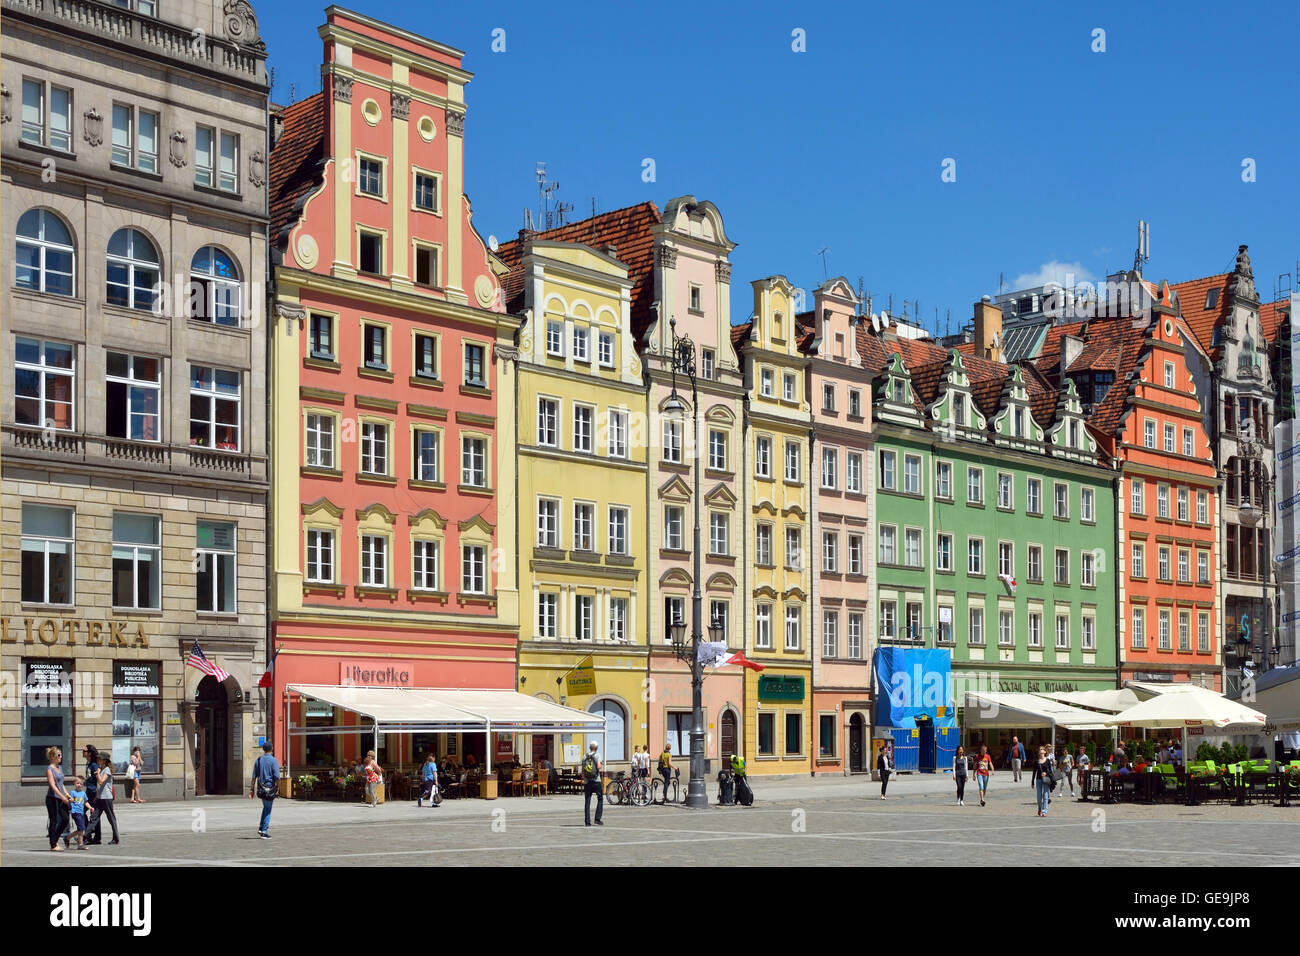 Market Square in the Old Town of Wroclaw. Stock Photo